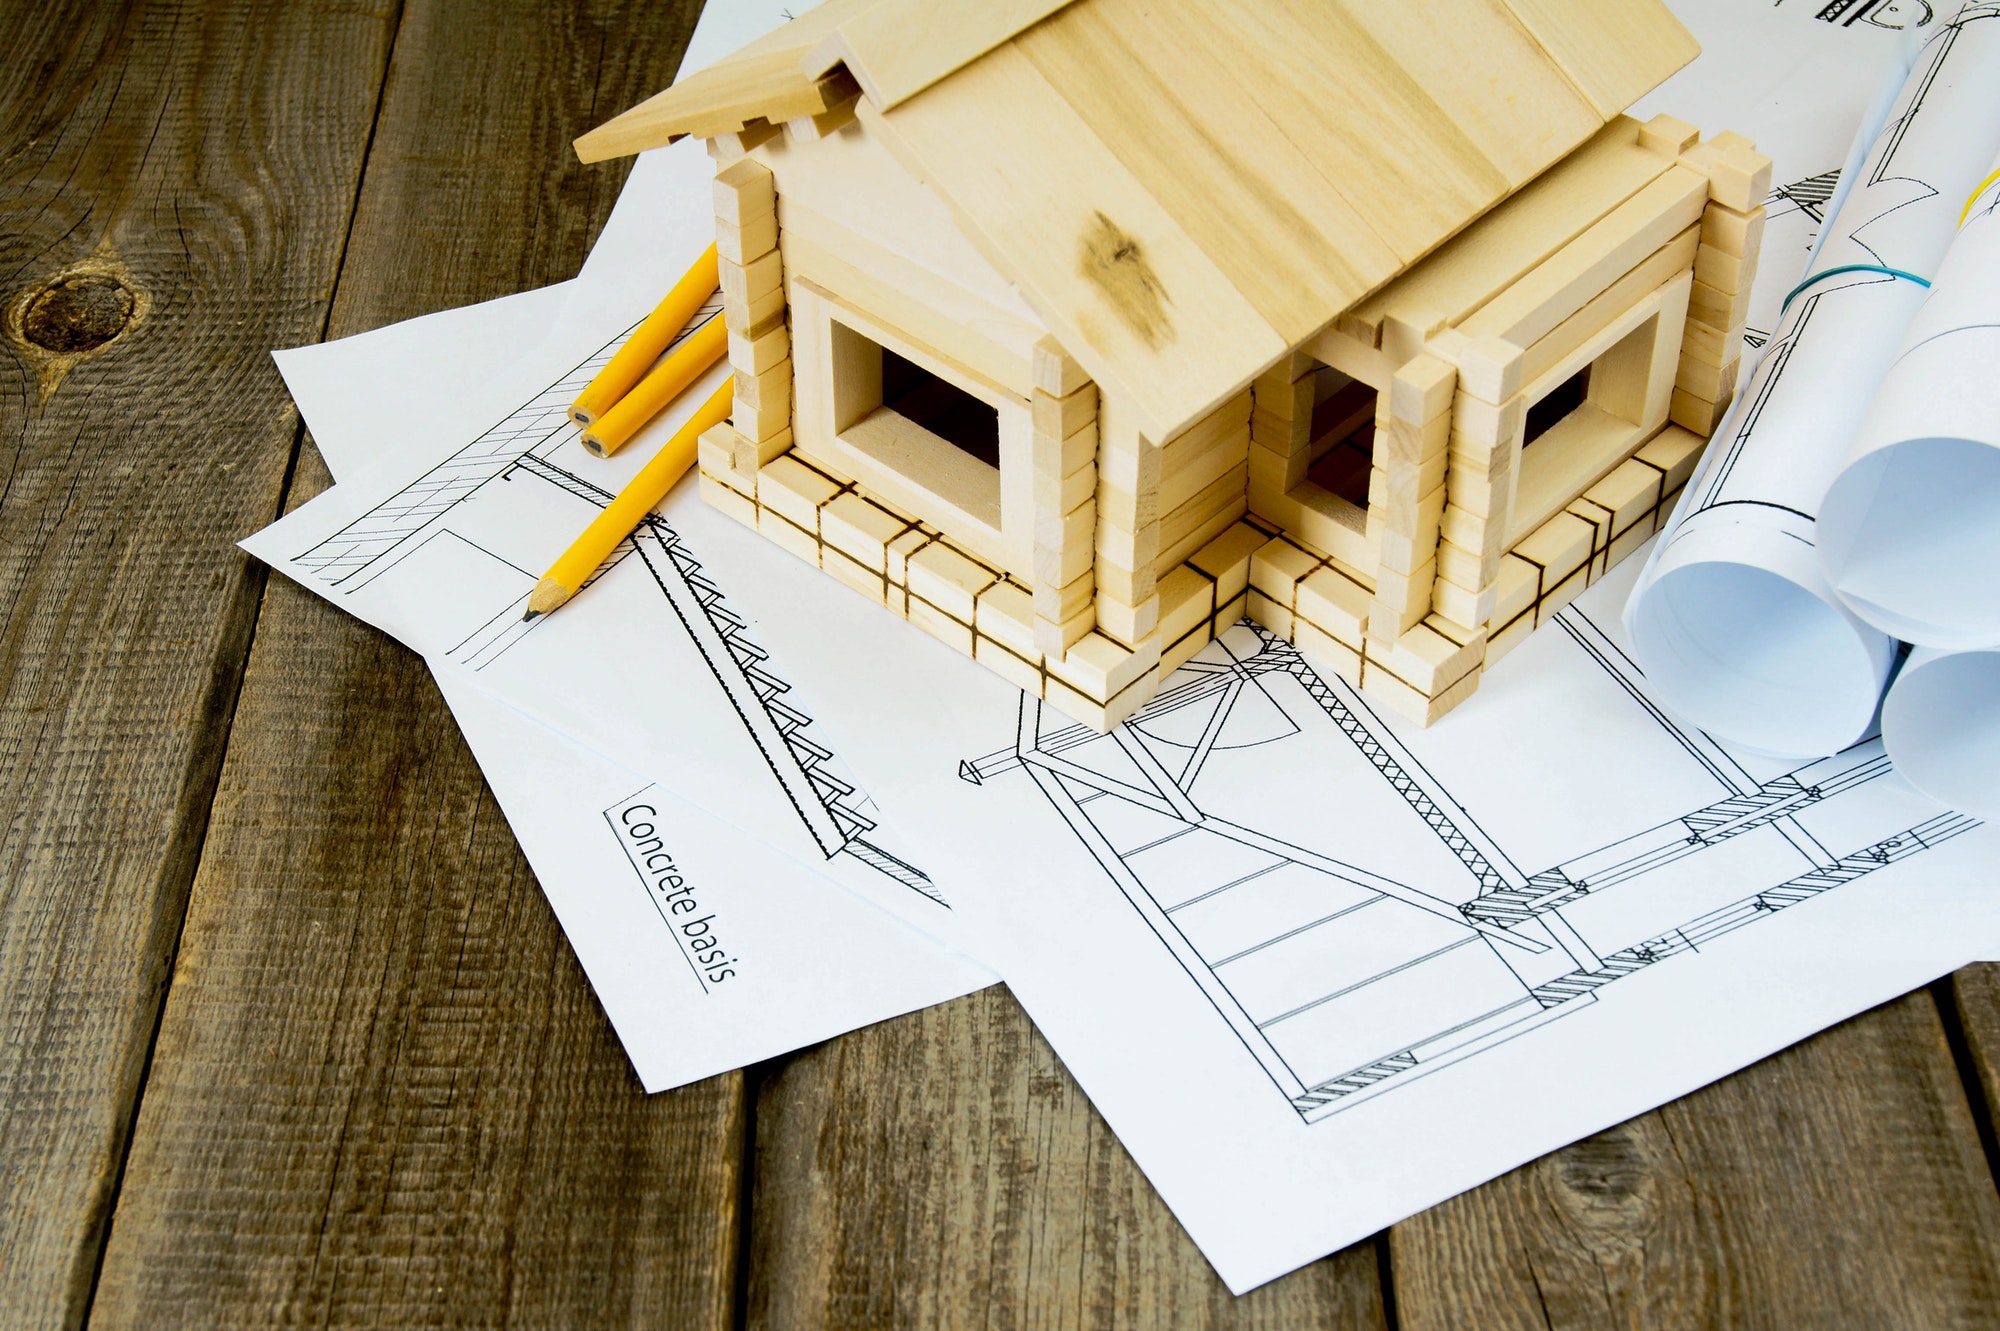 Many drawings for building and small house on old wooden background.